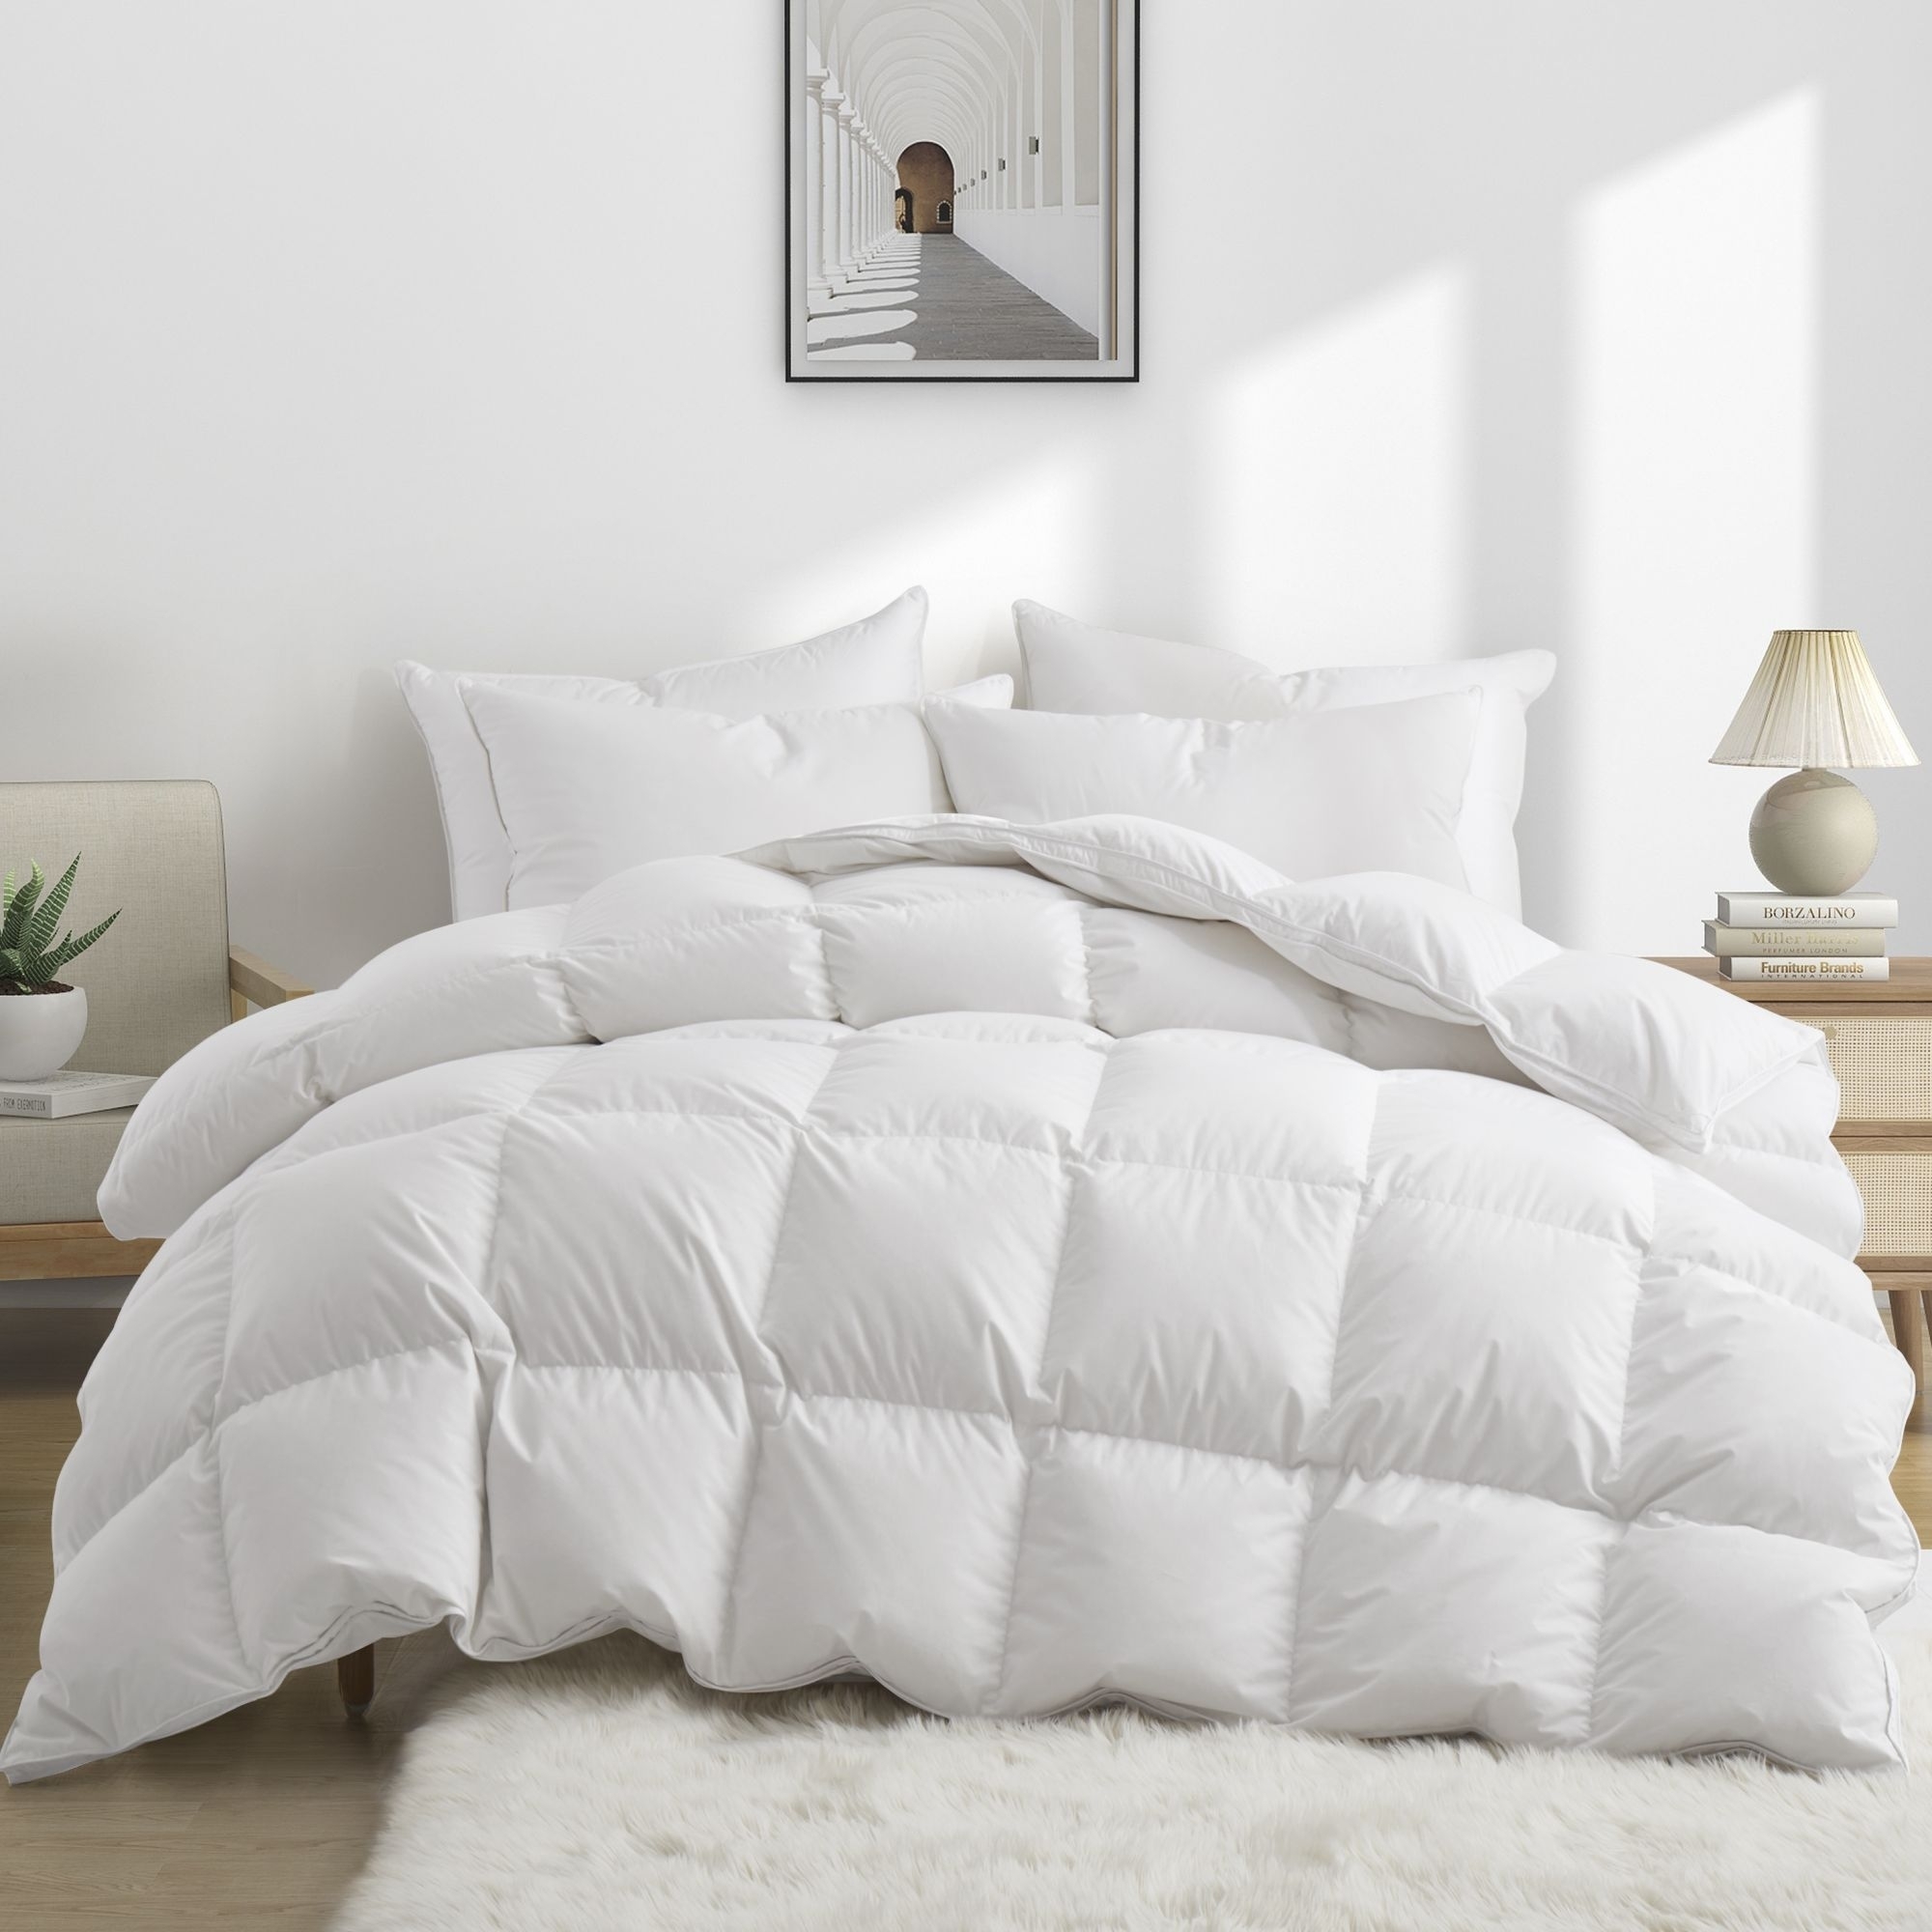 Made In Germany 800 Fill Power Luxurious European White Down Comforter-Heavy Weight Comforter& Medium Weight Comforter - Heavyweight, King